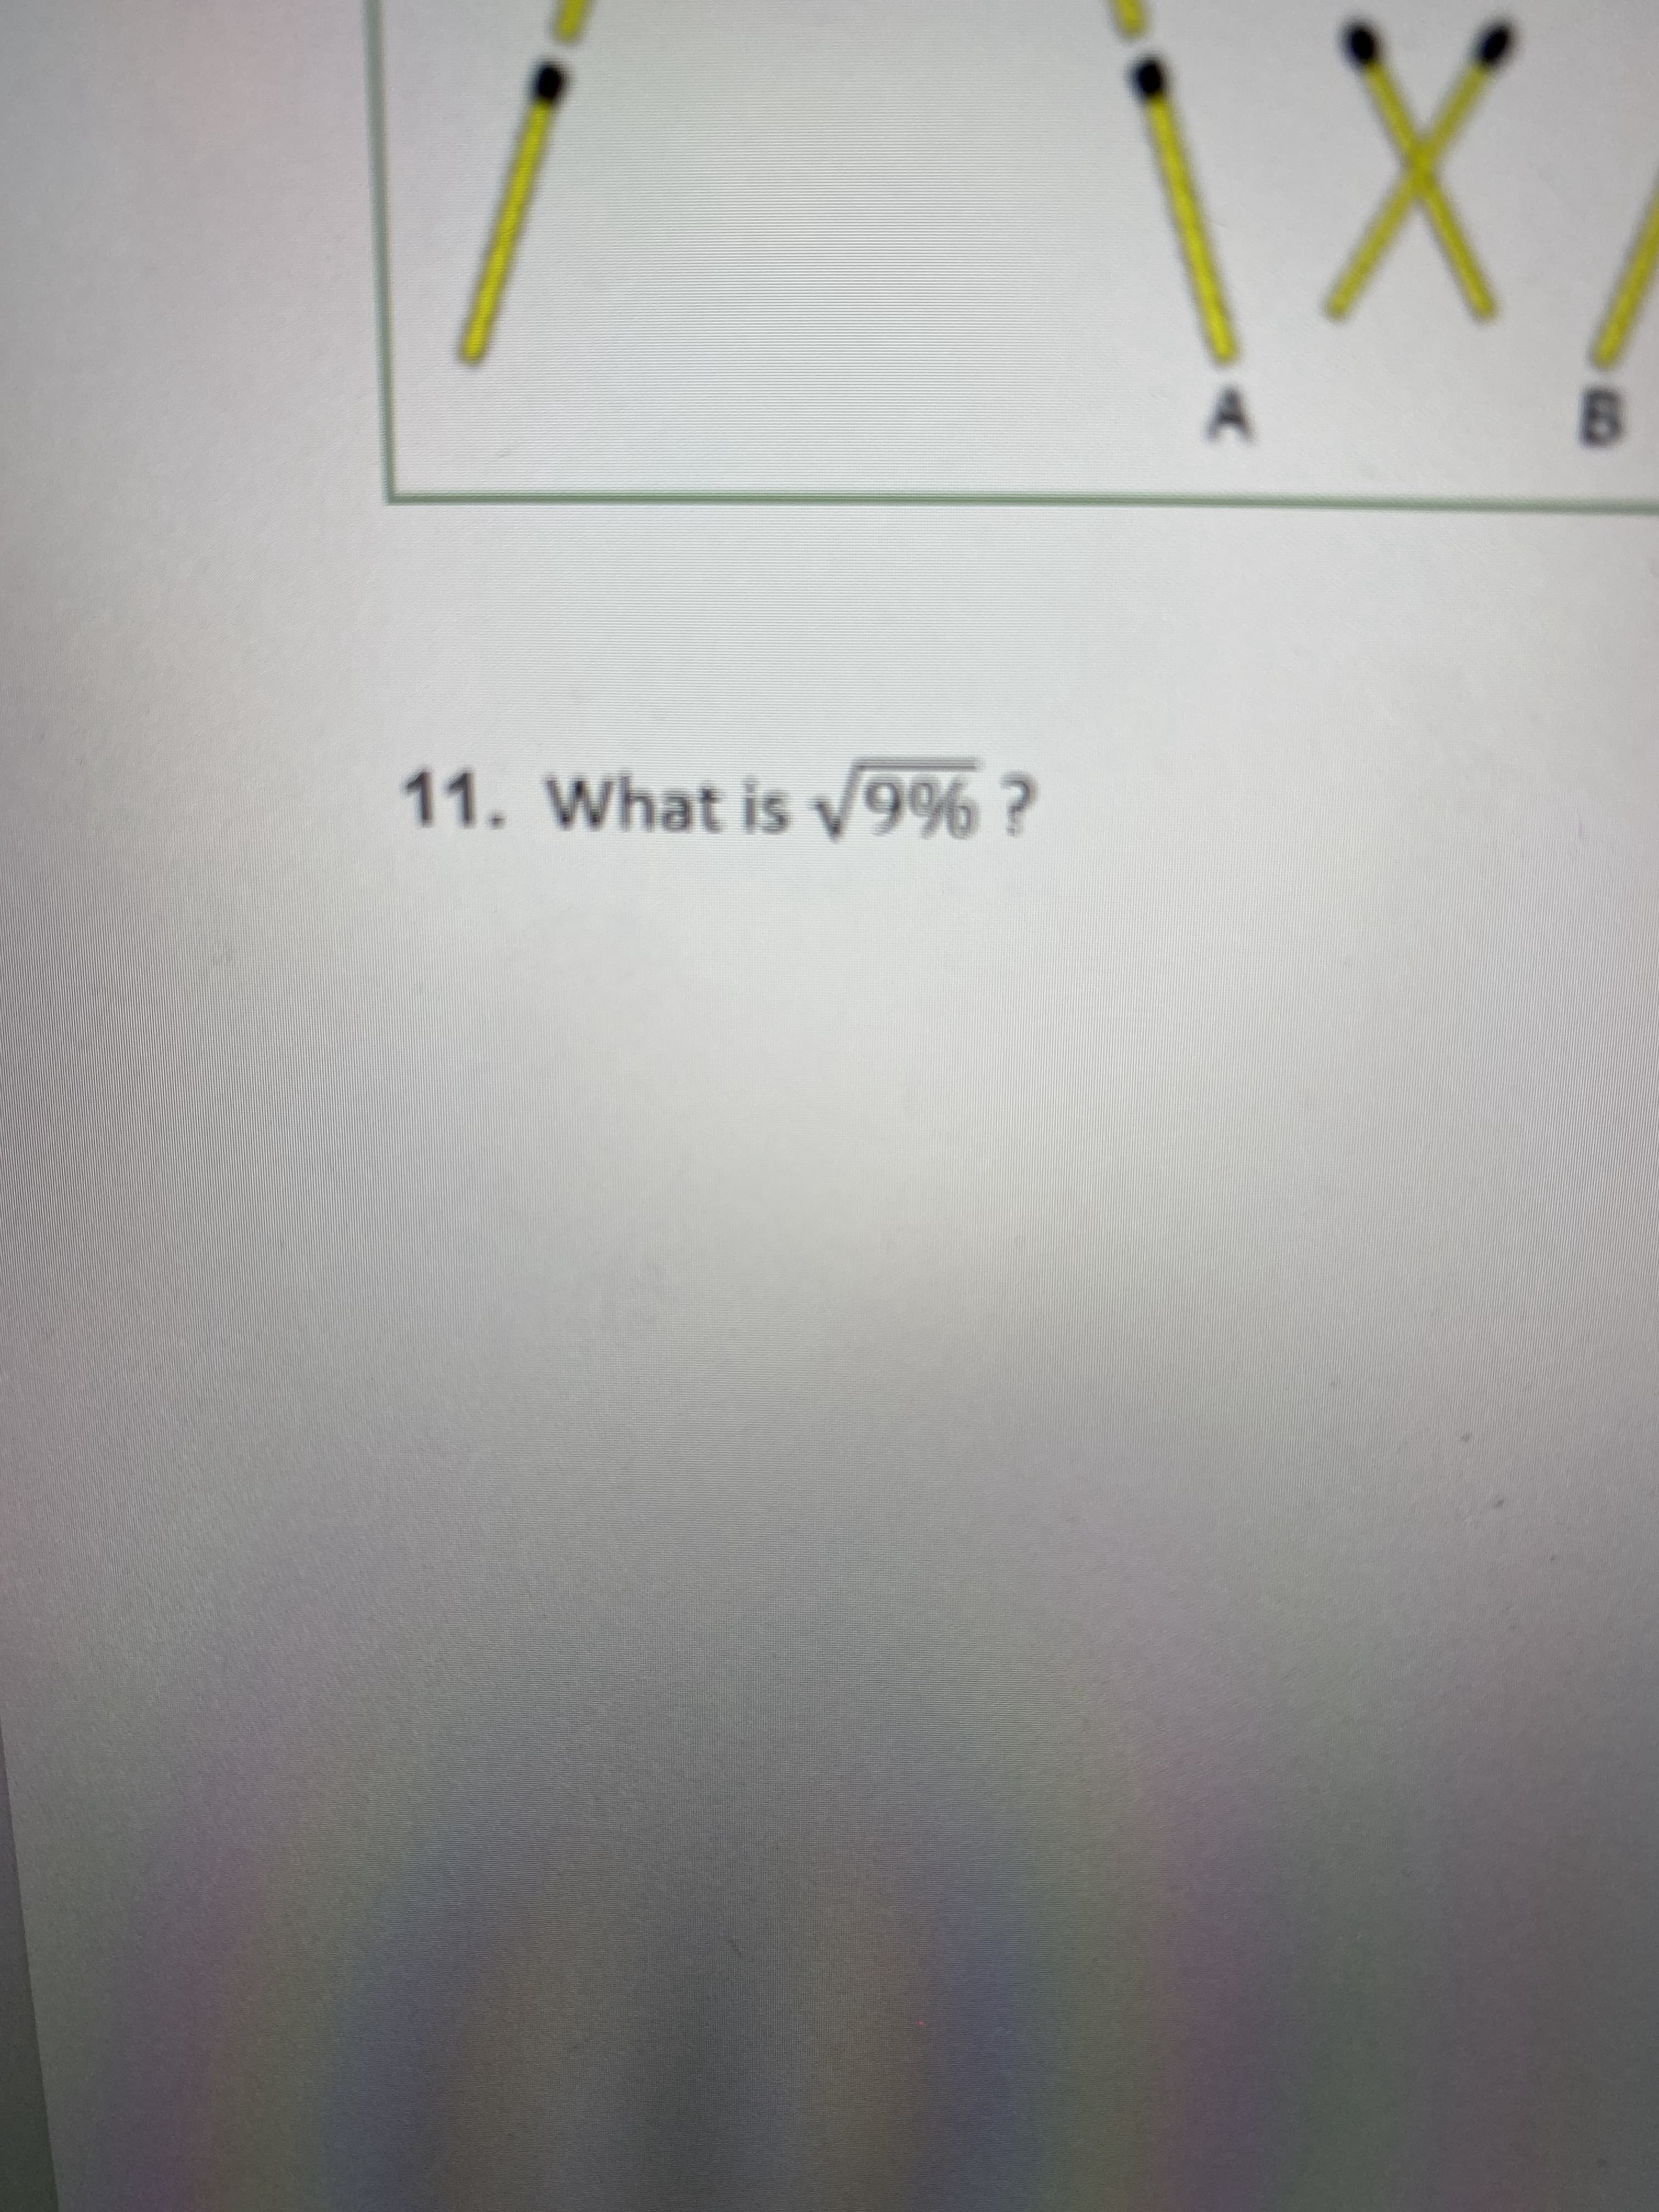 What is v9%?
